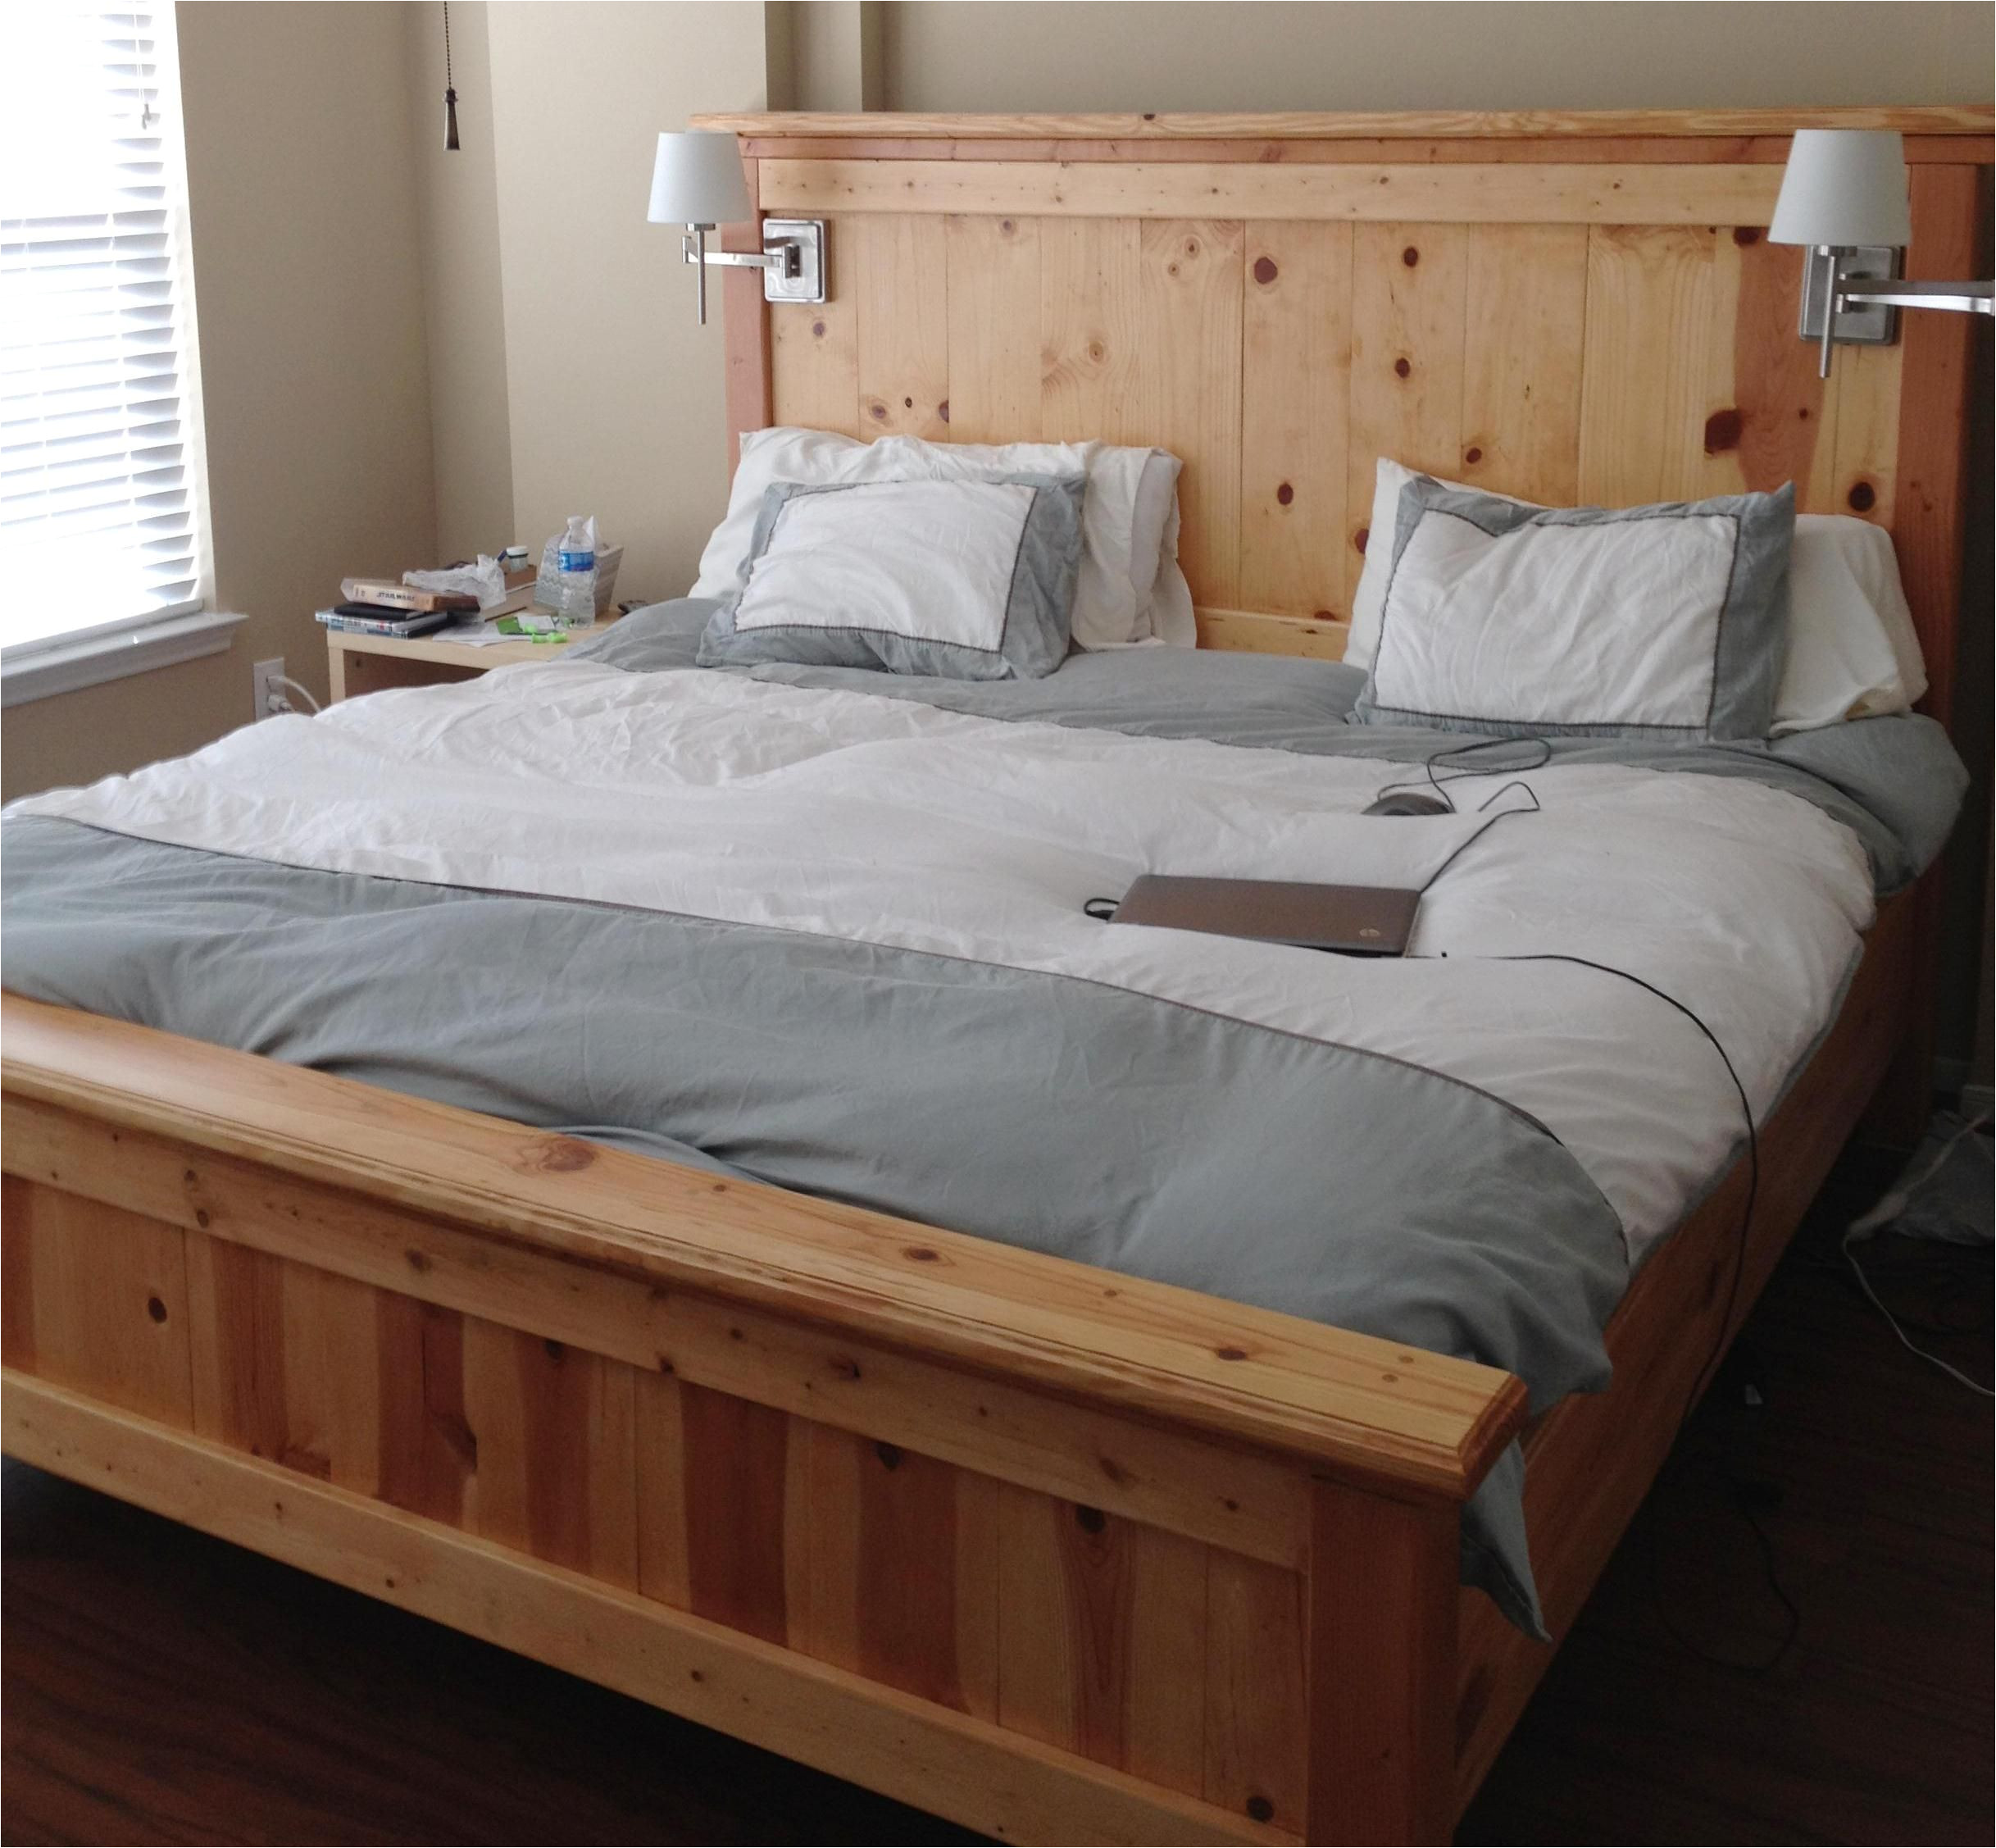 bed frame blueprints free farmhouse bed king do it yourself home projects from ana white